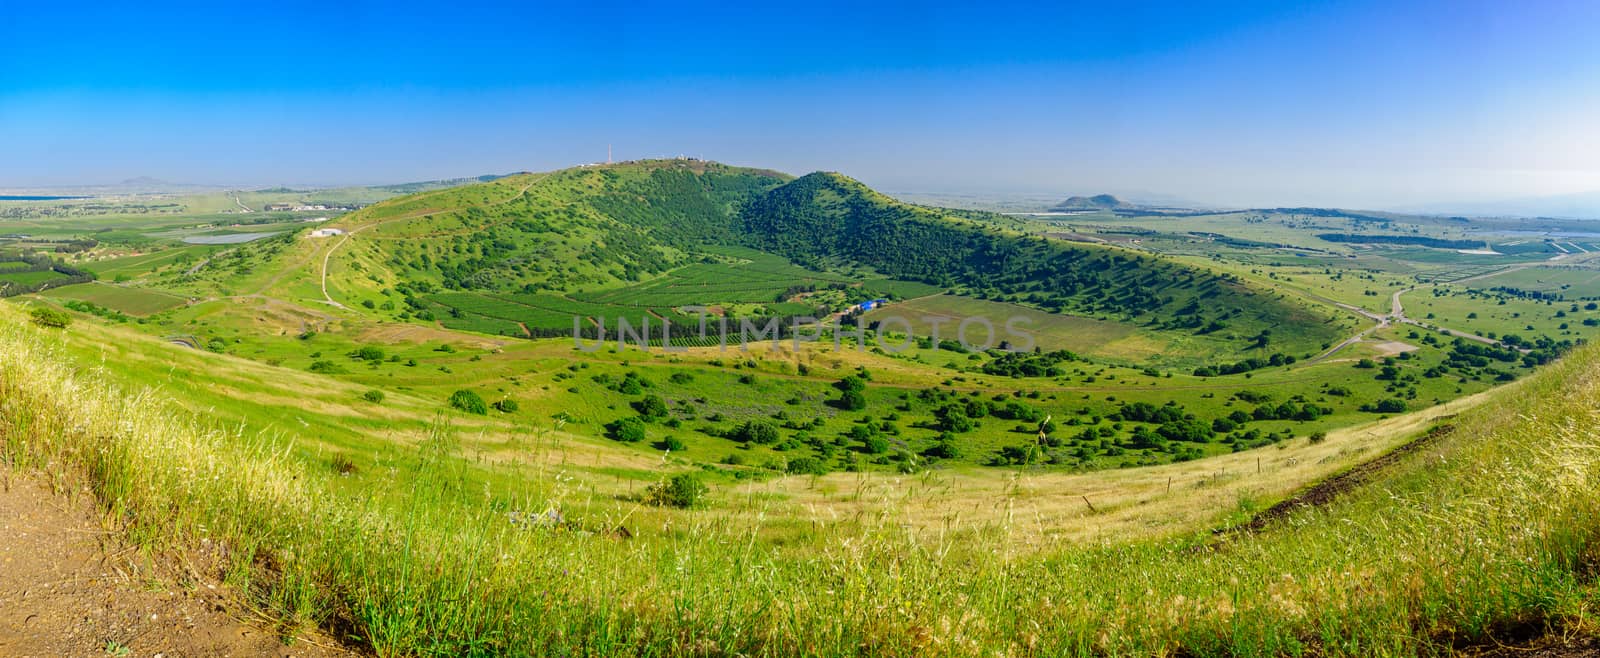 Panoramic view of the Golan Heights landscape from Mount Bental, Northern Israel and Syria